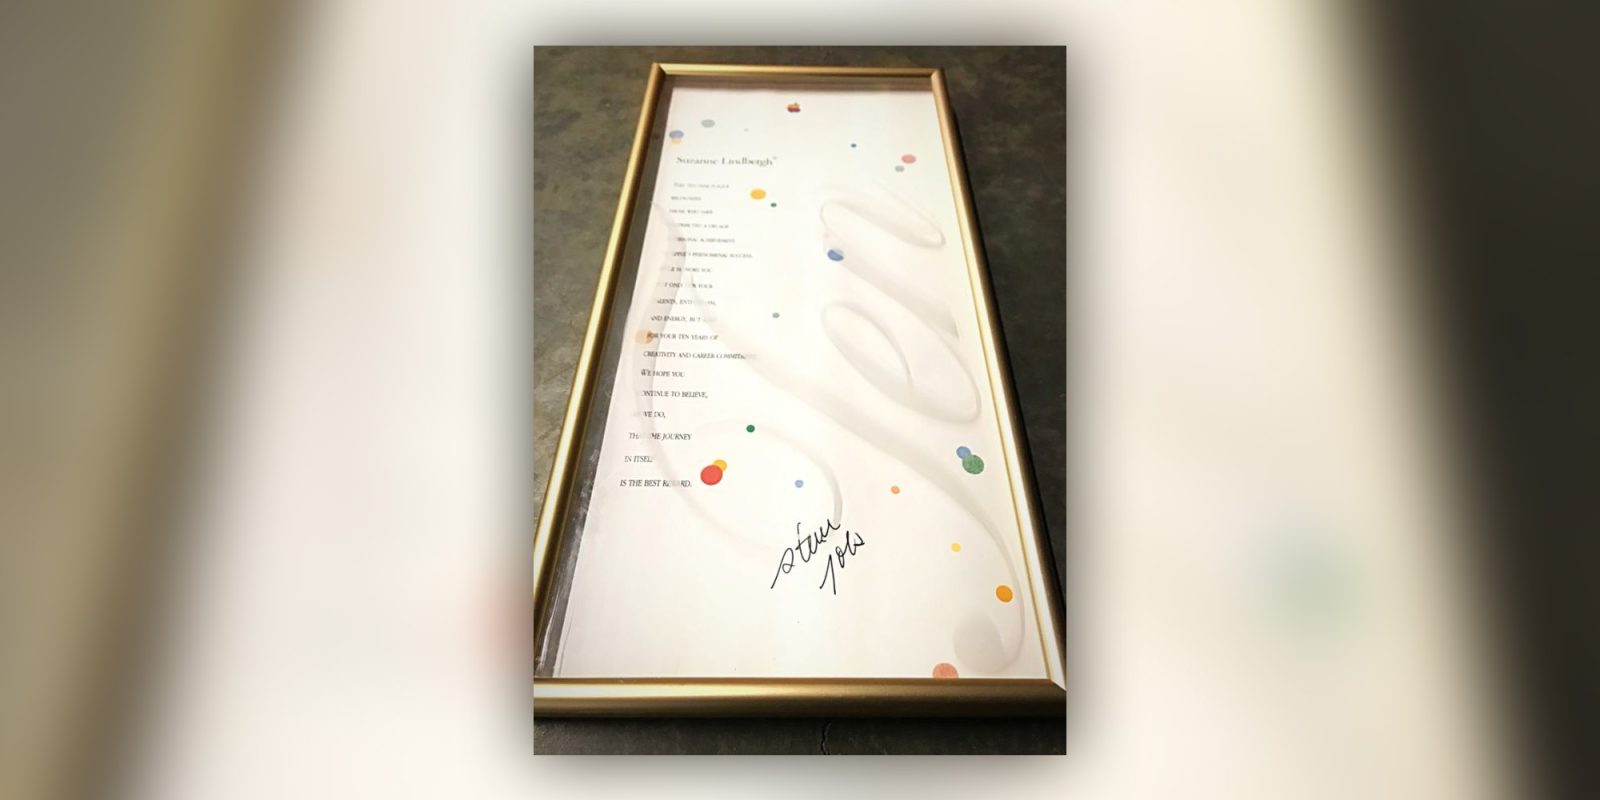 This Steve Jobs autographed award could be yours for a cool $95,000